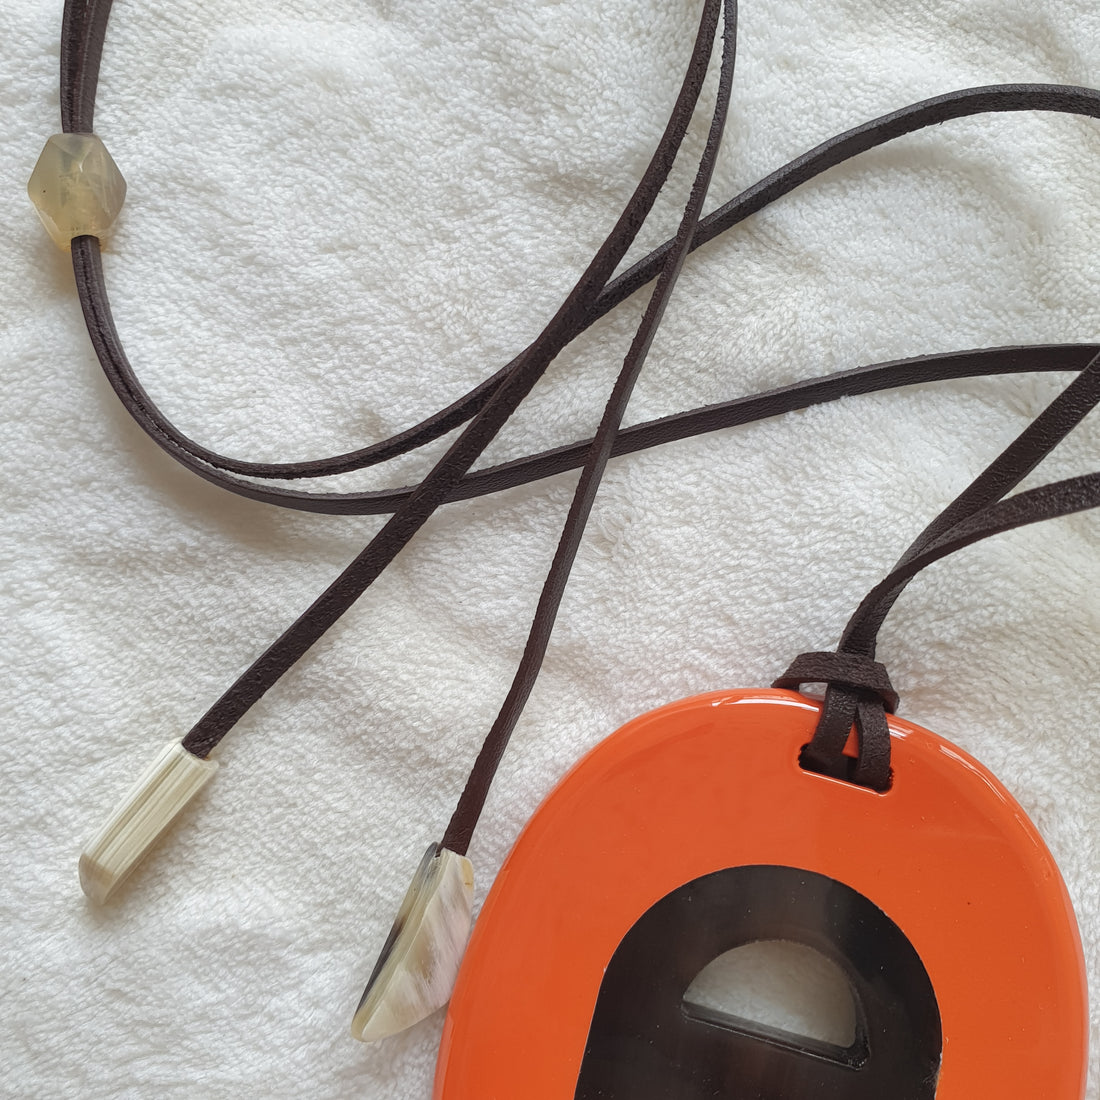 orange lacquer pendant with suede brown cord on the light background, impressive gift for her